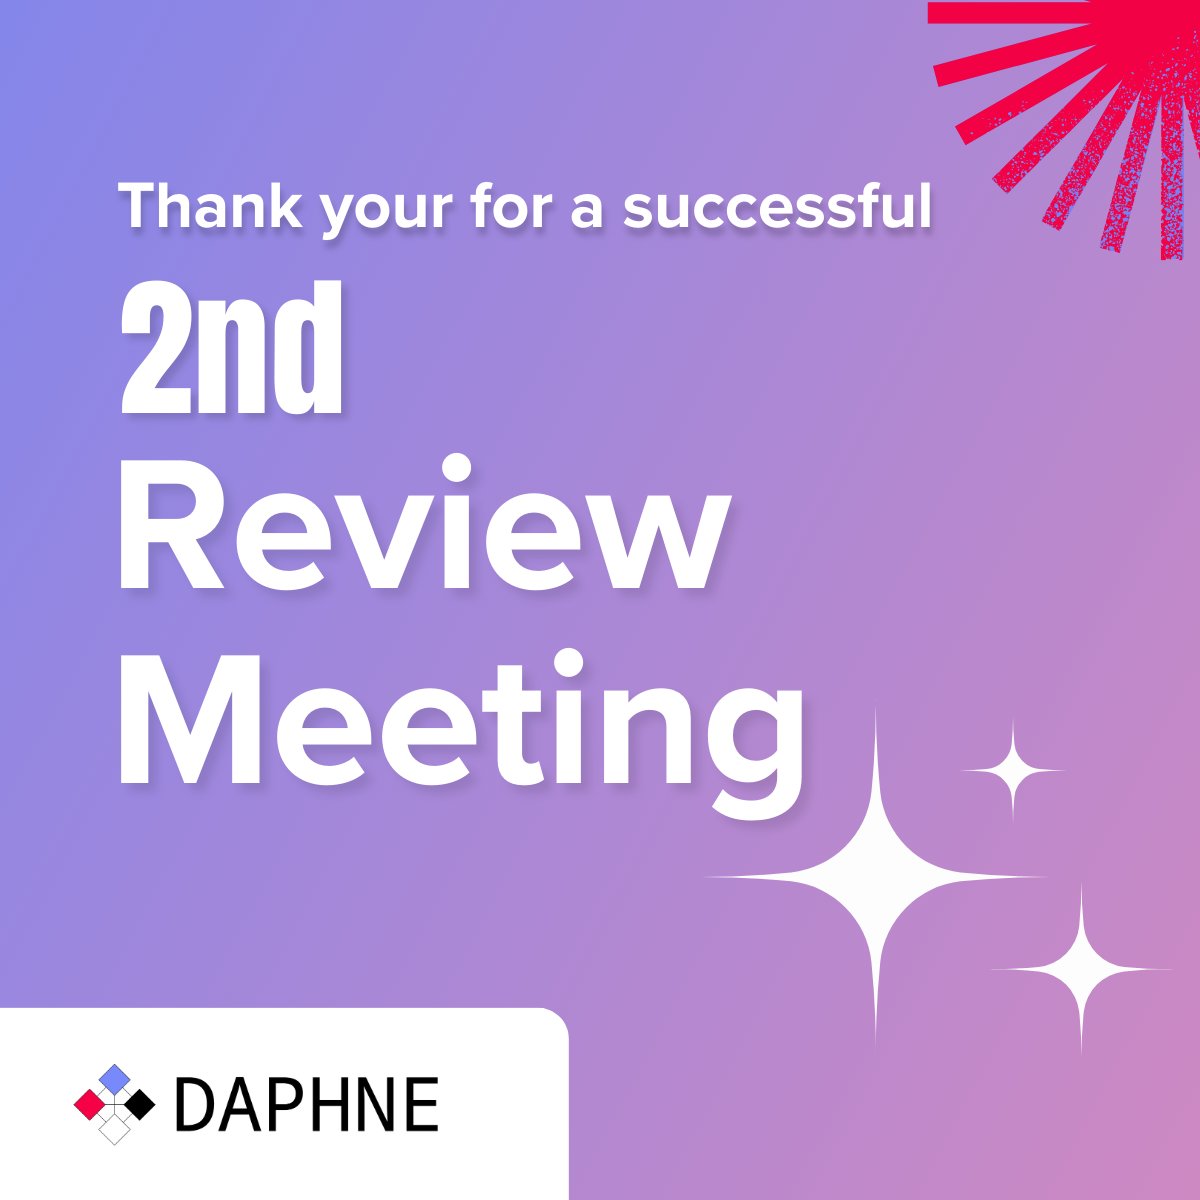 Yesterday's 2nd Review Meeting for the DAPHNE project was a success! Thank you to the consortium for excellent presentations, and special appreciation to Lars Melander and Adela Muresan for valuable feedback.

#euproject #presentation #reviewmeeting #datapipelines #kpi